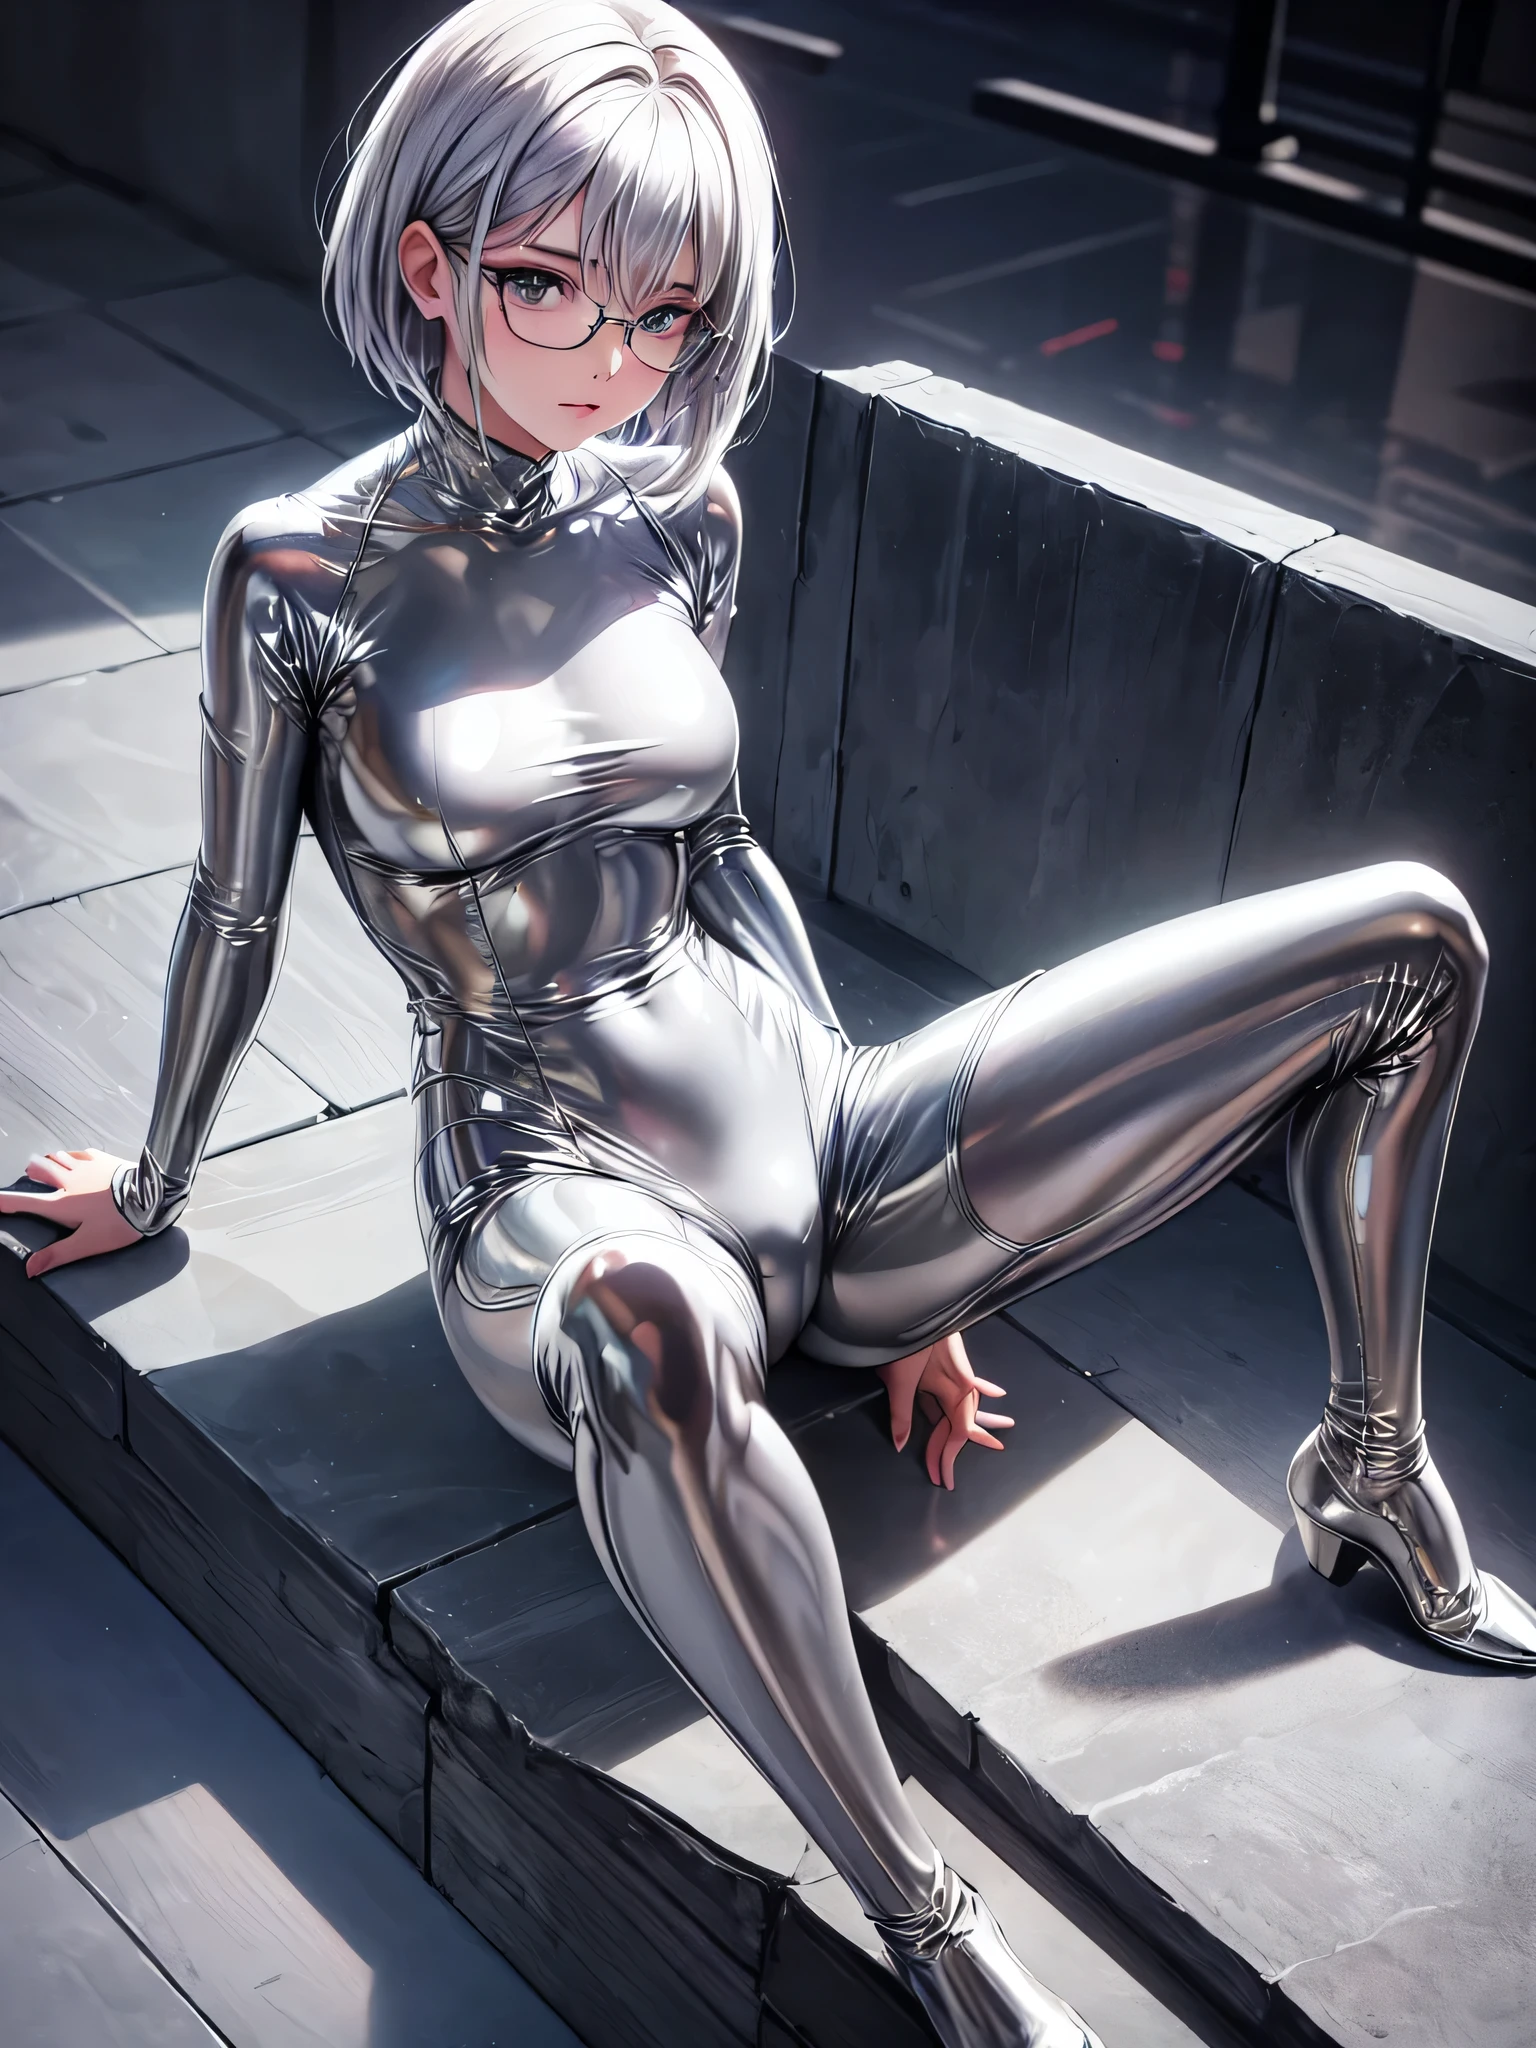 Highest quality 8K UHD、muste piece、Upper body、short hair、Spread your legs apart、sitting down and raising one leg、silver hair、Glasses、Full body shiny silver tights、A beautiful woman wearing a silver metallic suit、Full body silver metallic rubber suit